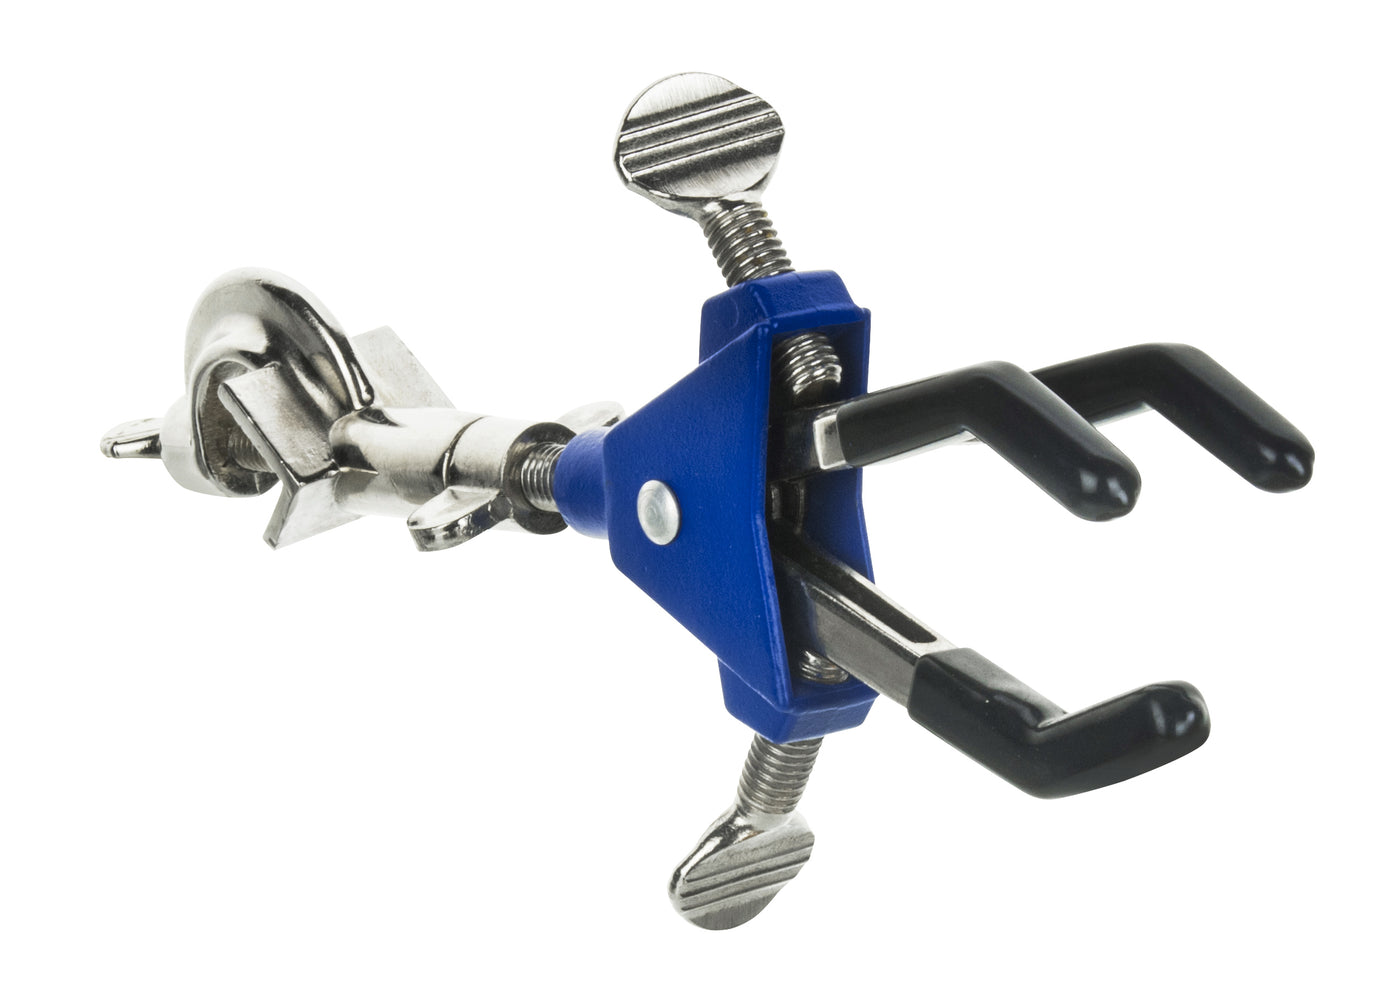 3 Finger Adjustable Clamp on Swivel Bosshead - 2.3 Max Opening